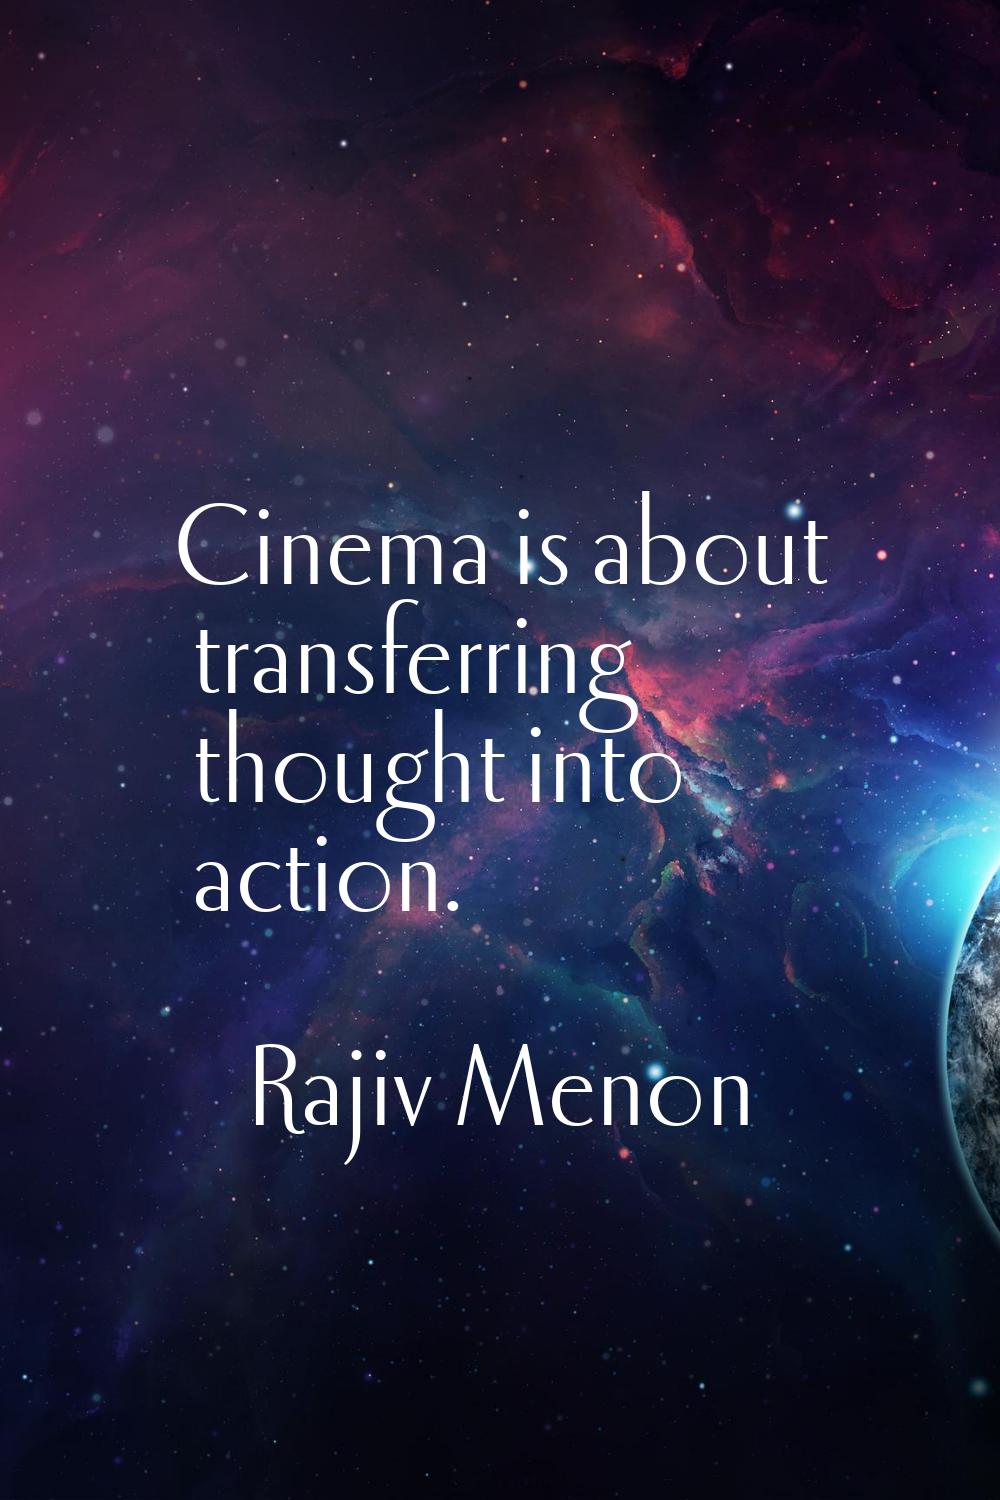 Cinema is about transferring thought into action.